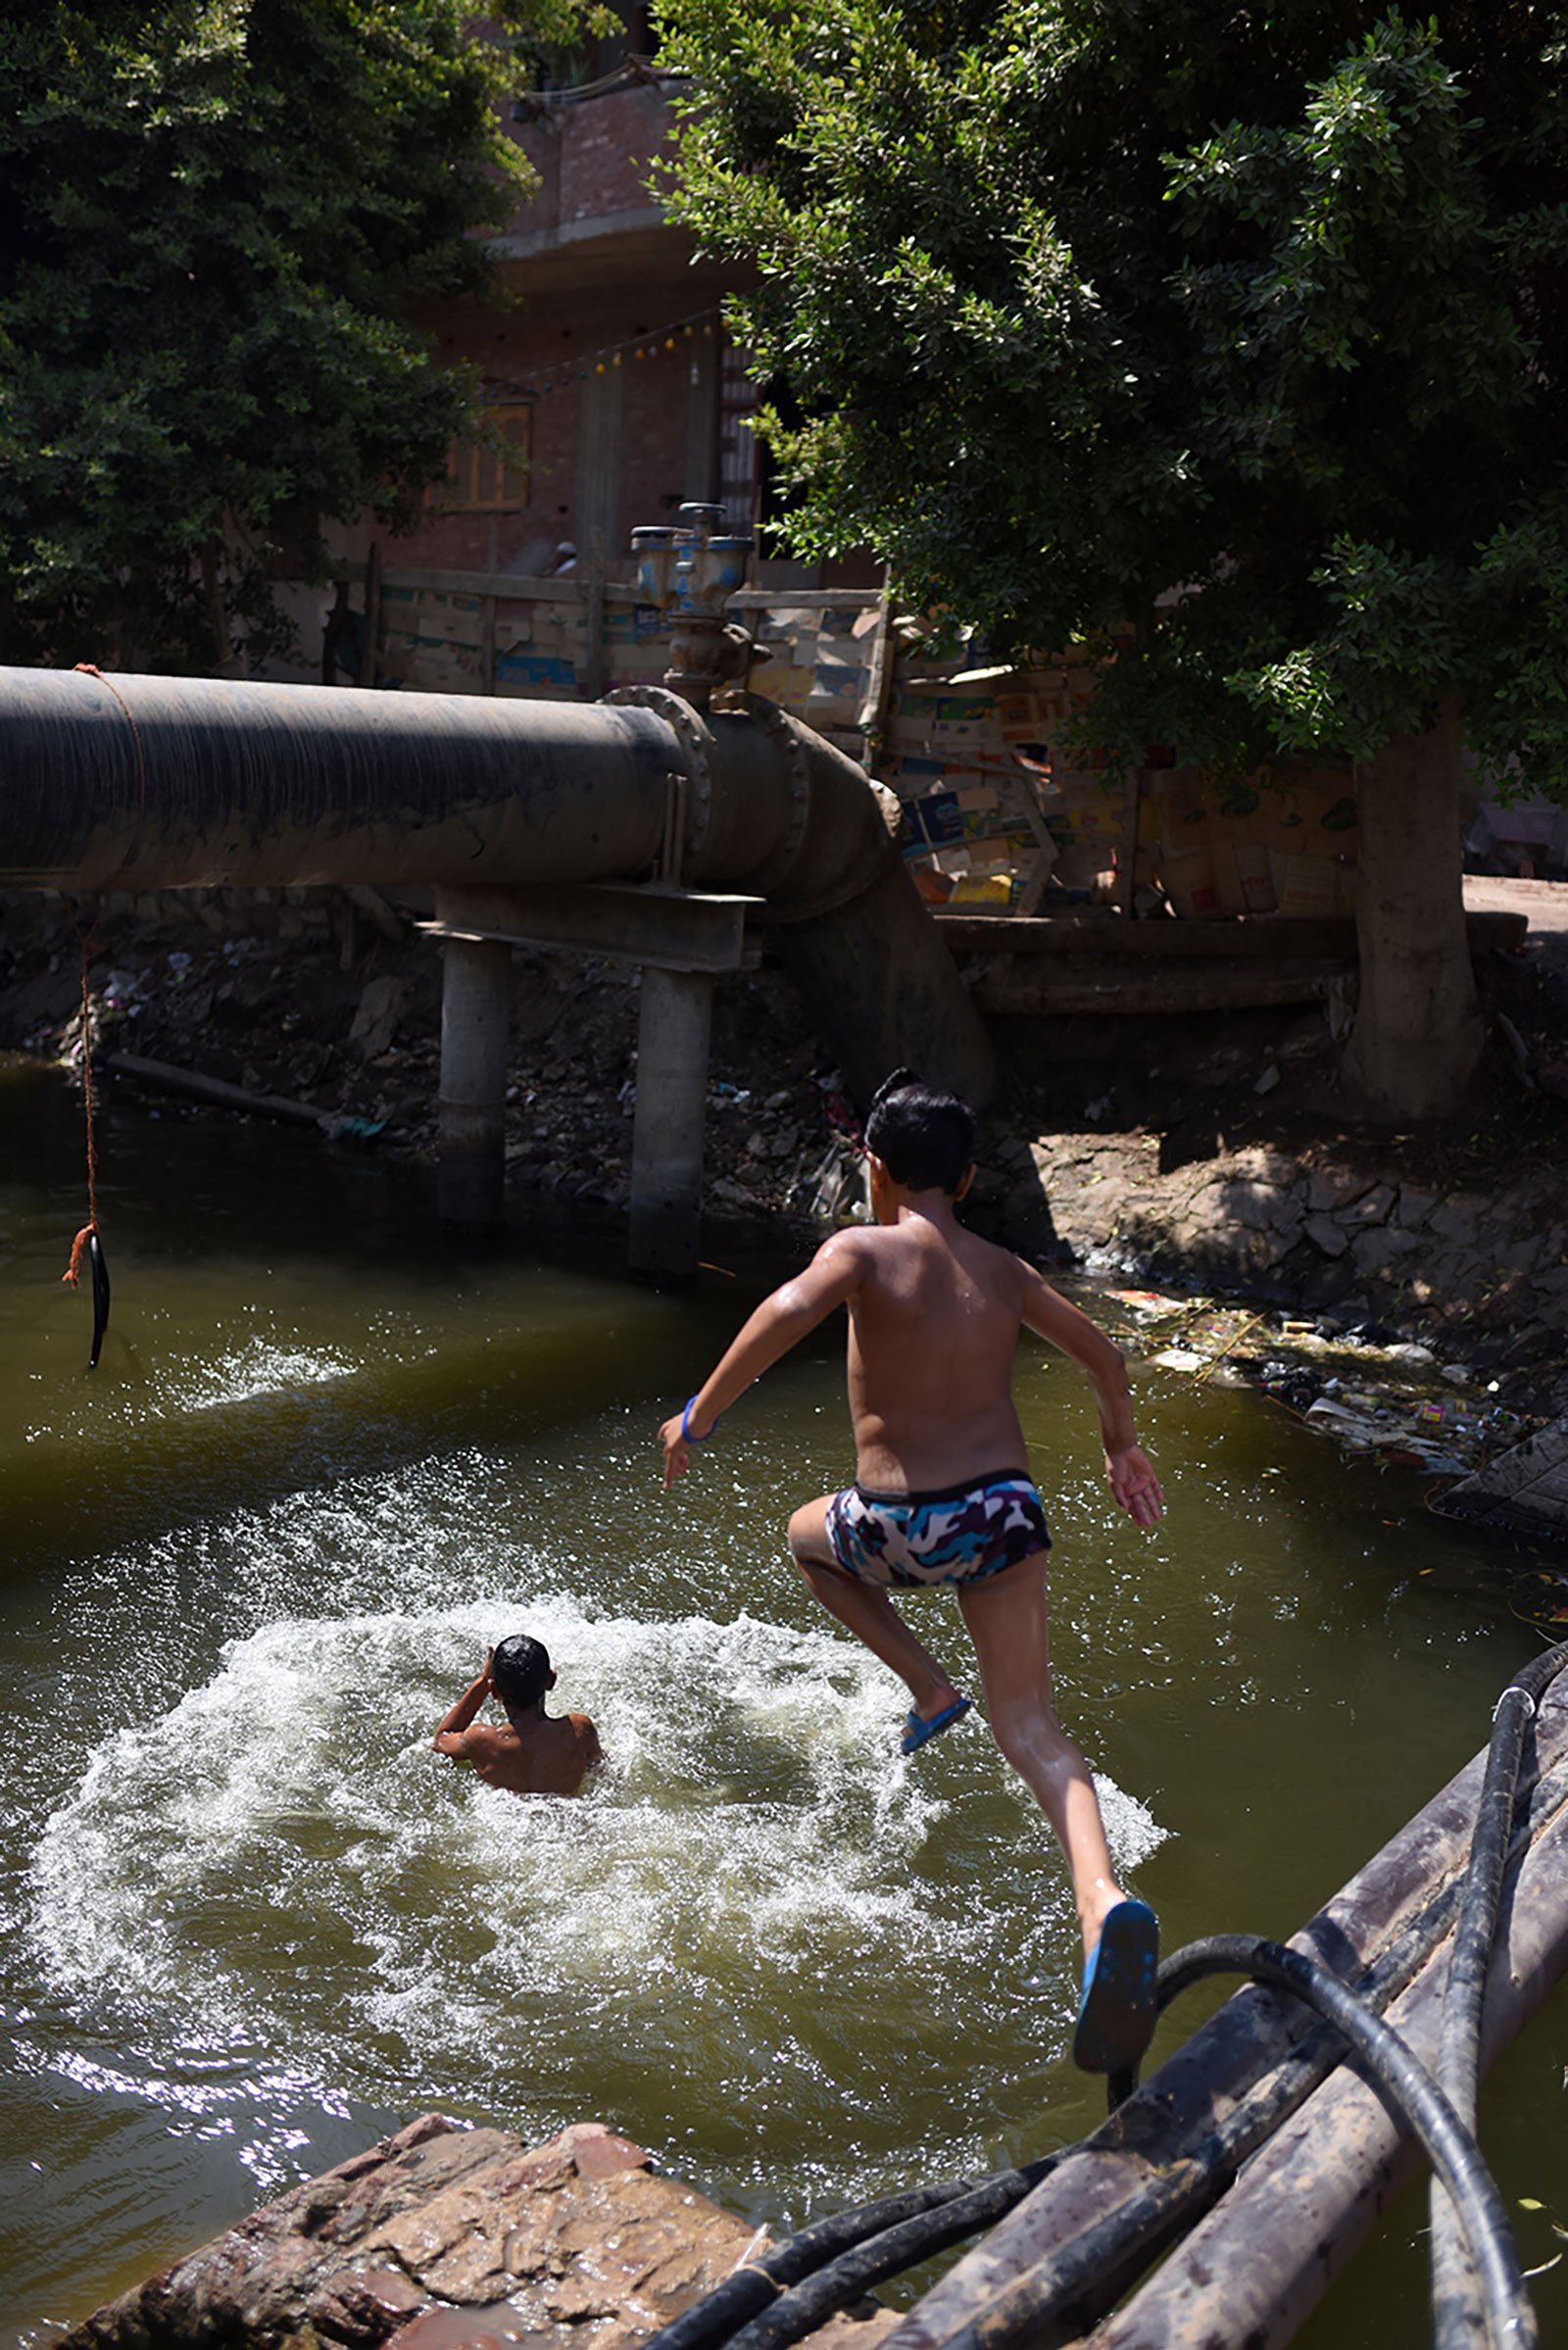 Young people jumping into a swimming area